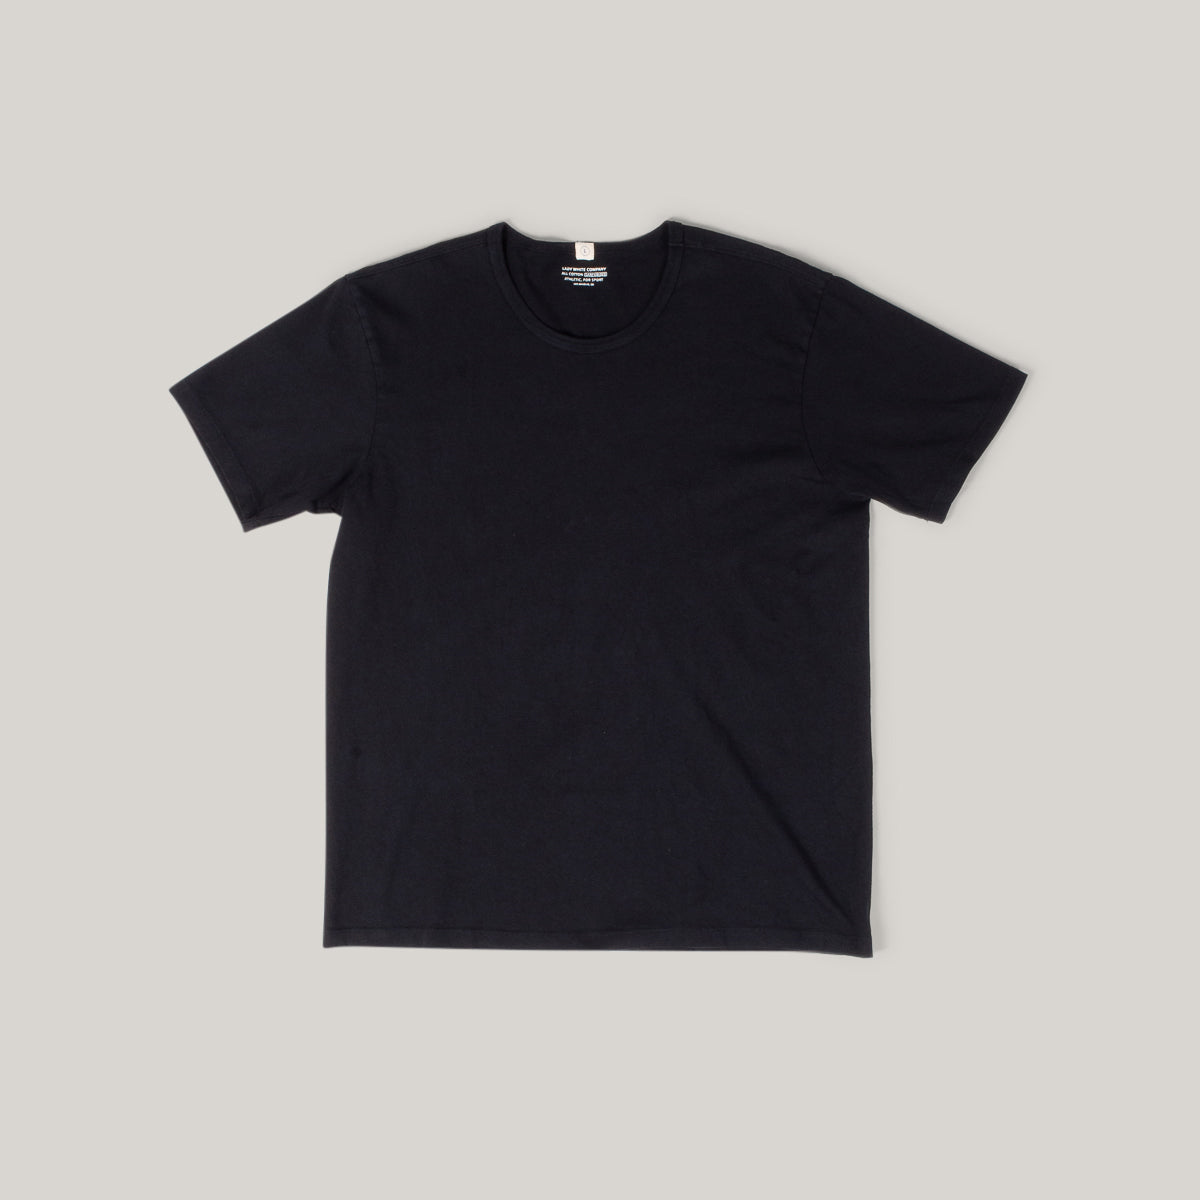 LADY WHITE CO. TEE 2 PACK - BLACK